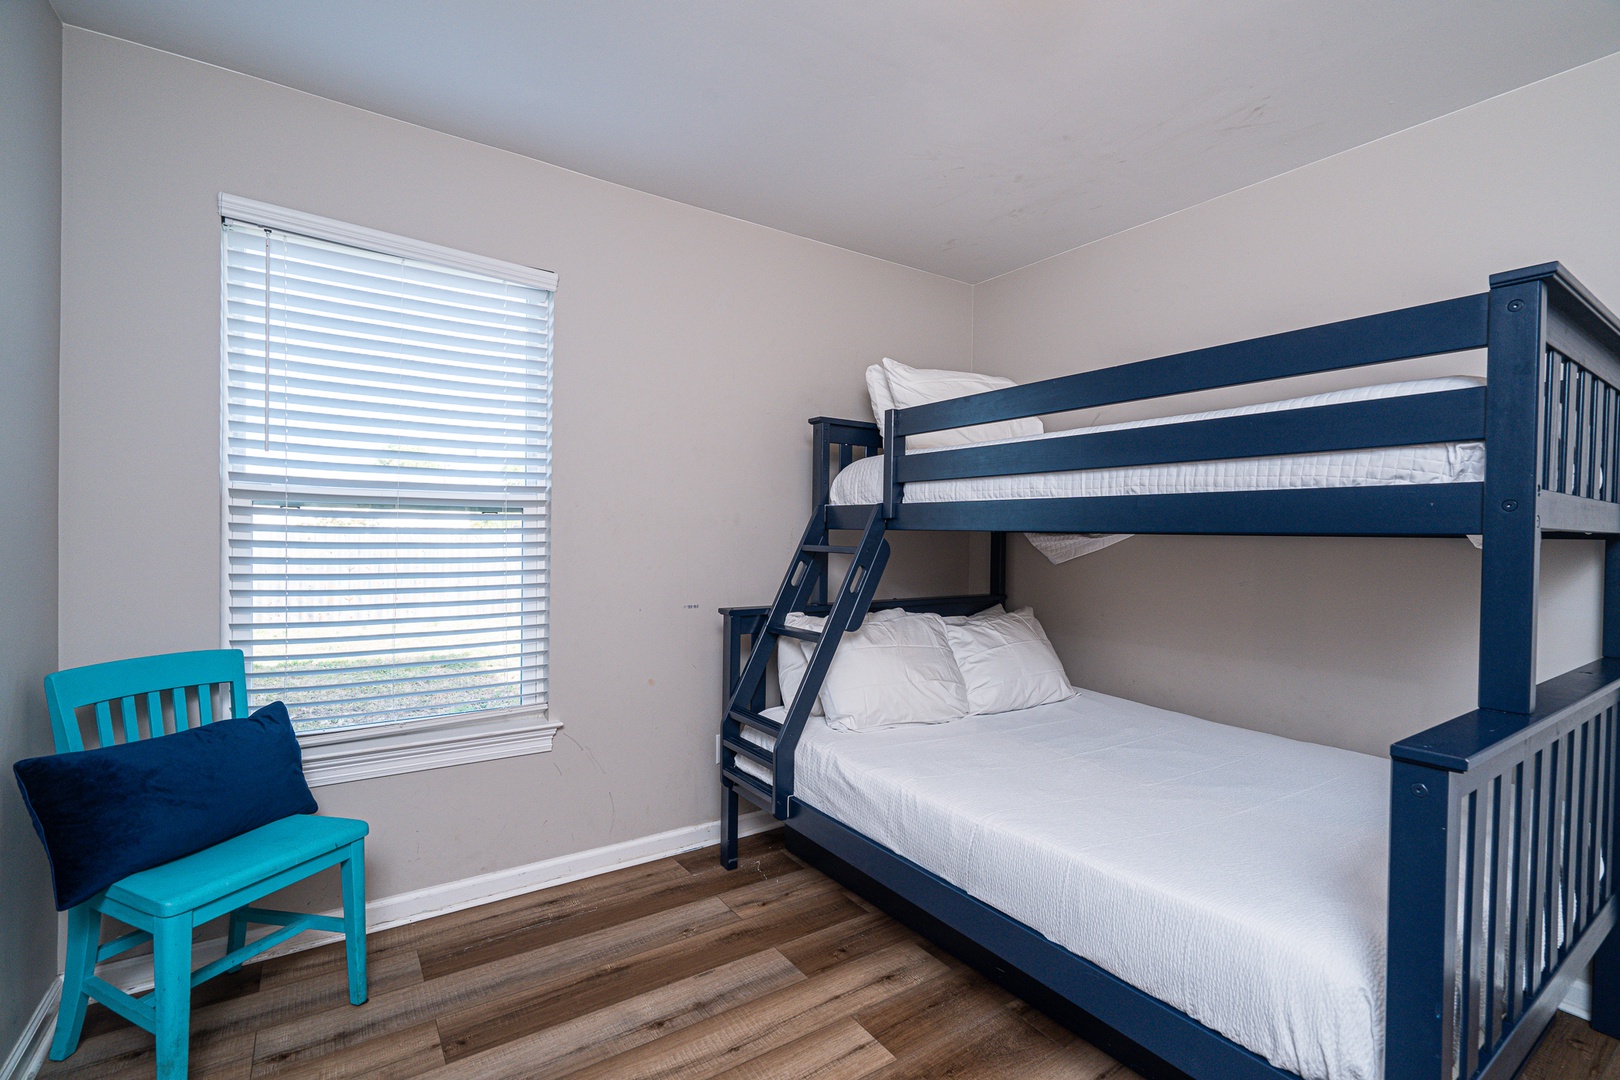 This 2nd floor bedroom offers a twin-over-full bunkbed & twin trundle